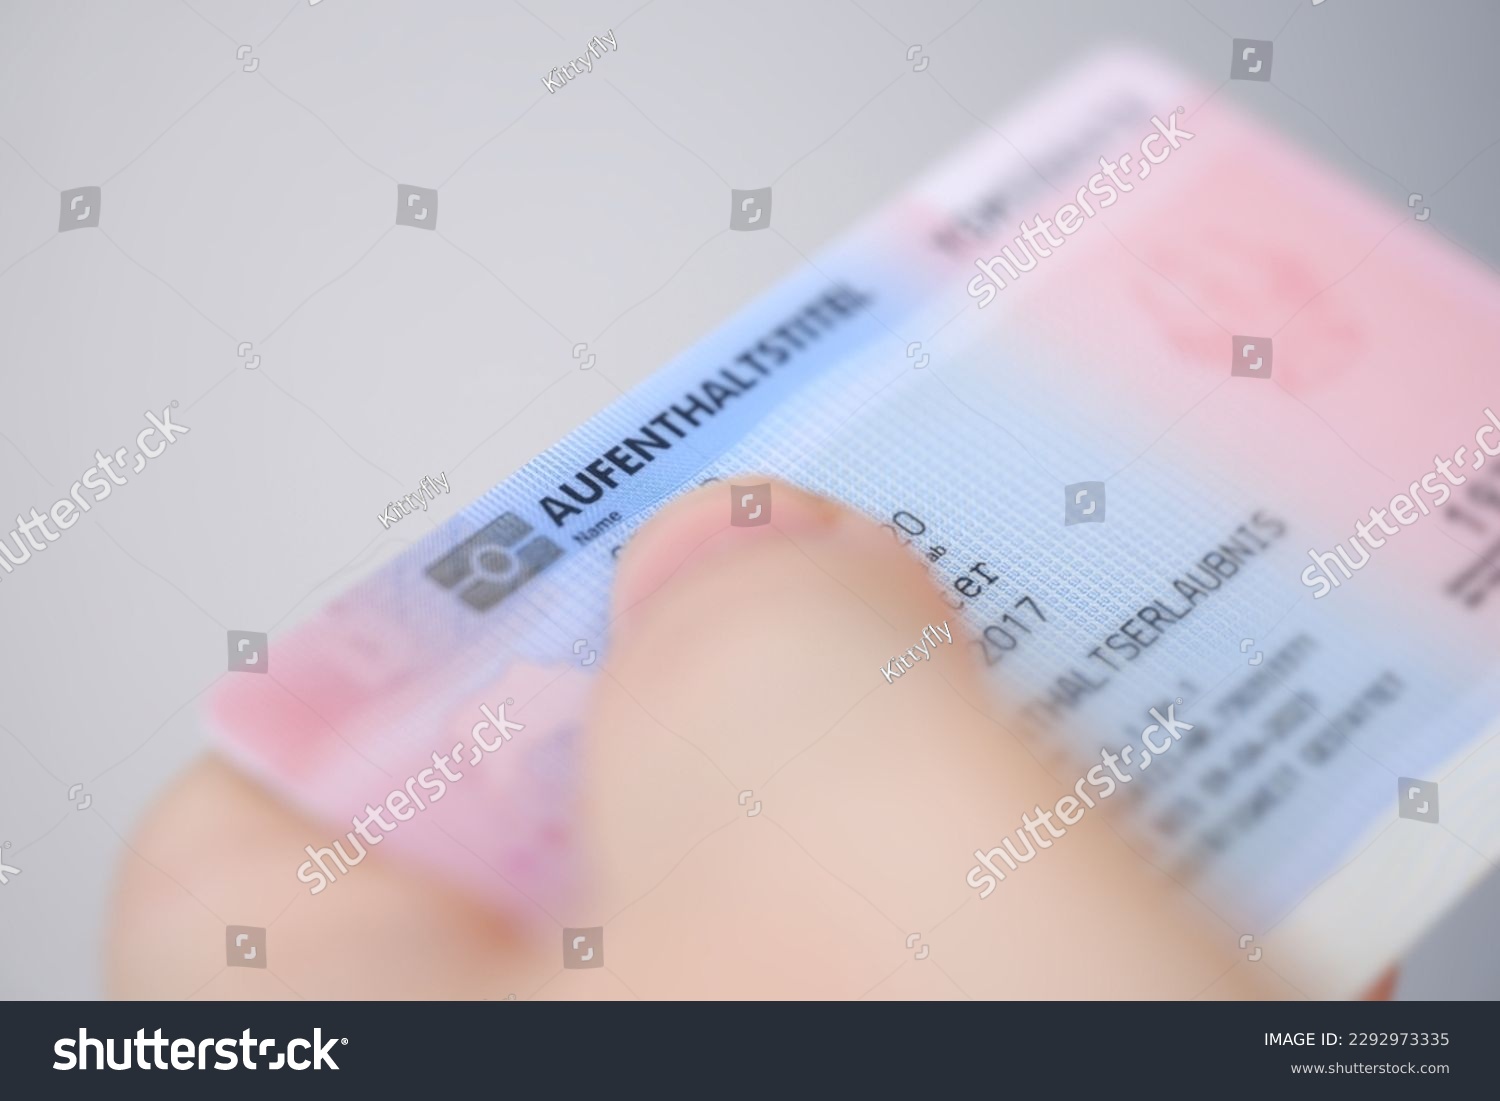 identity card, residence permit, personal document in female hand close-up with shallow depth of field, electronic communication in Europe, migration law, passport control at border, foreign travel #2292973335